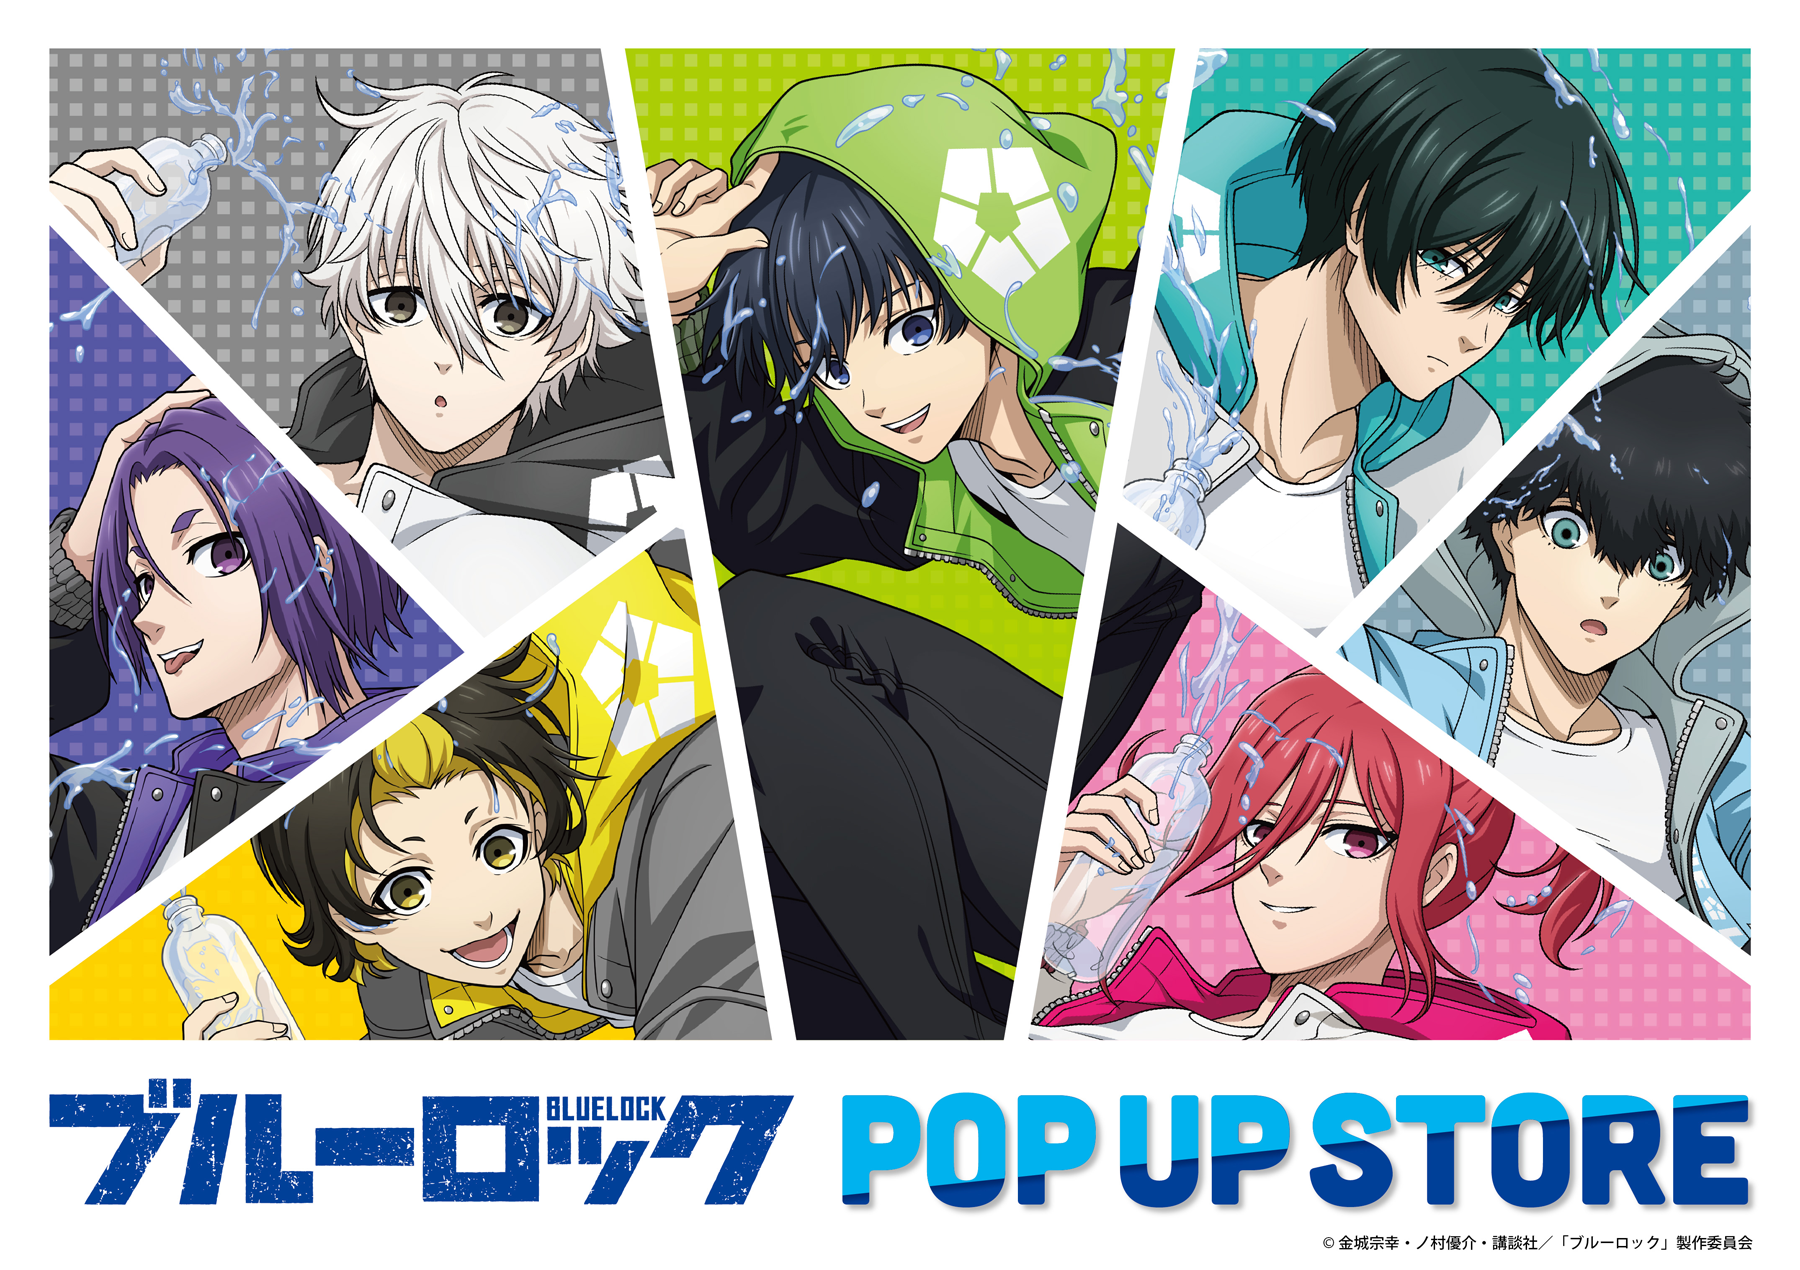 TV anime BLUE LOCK pop-up store is open at LOFT!